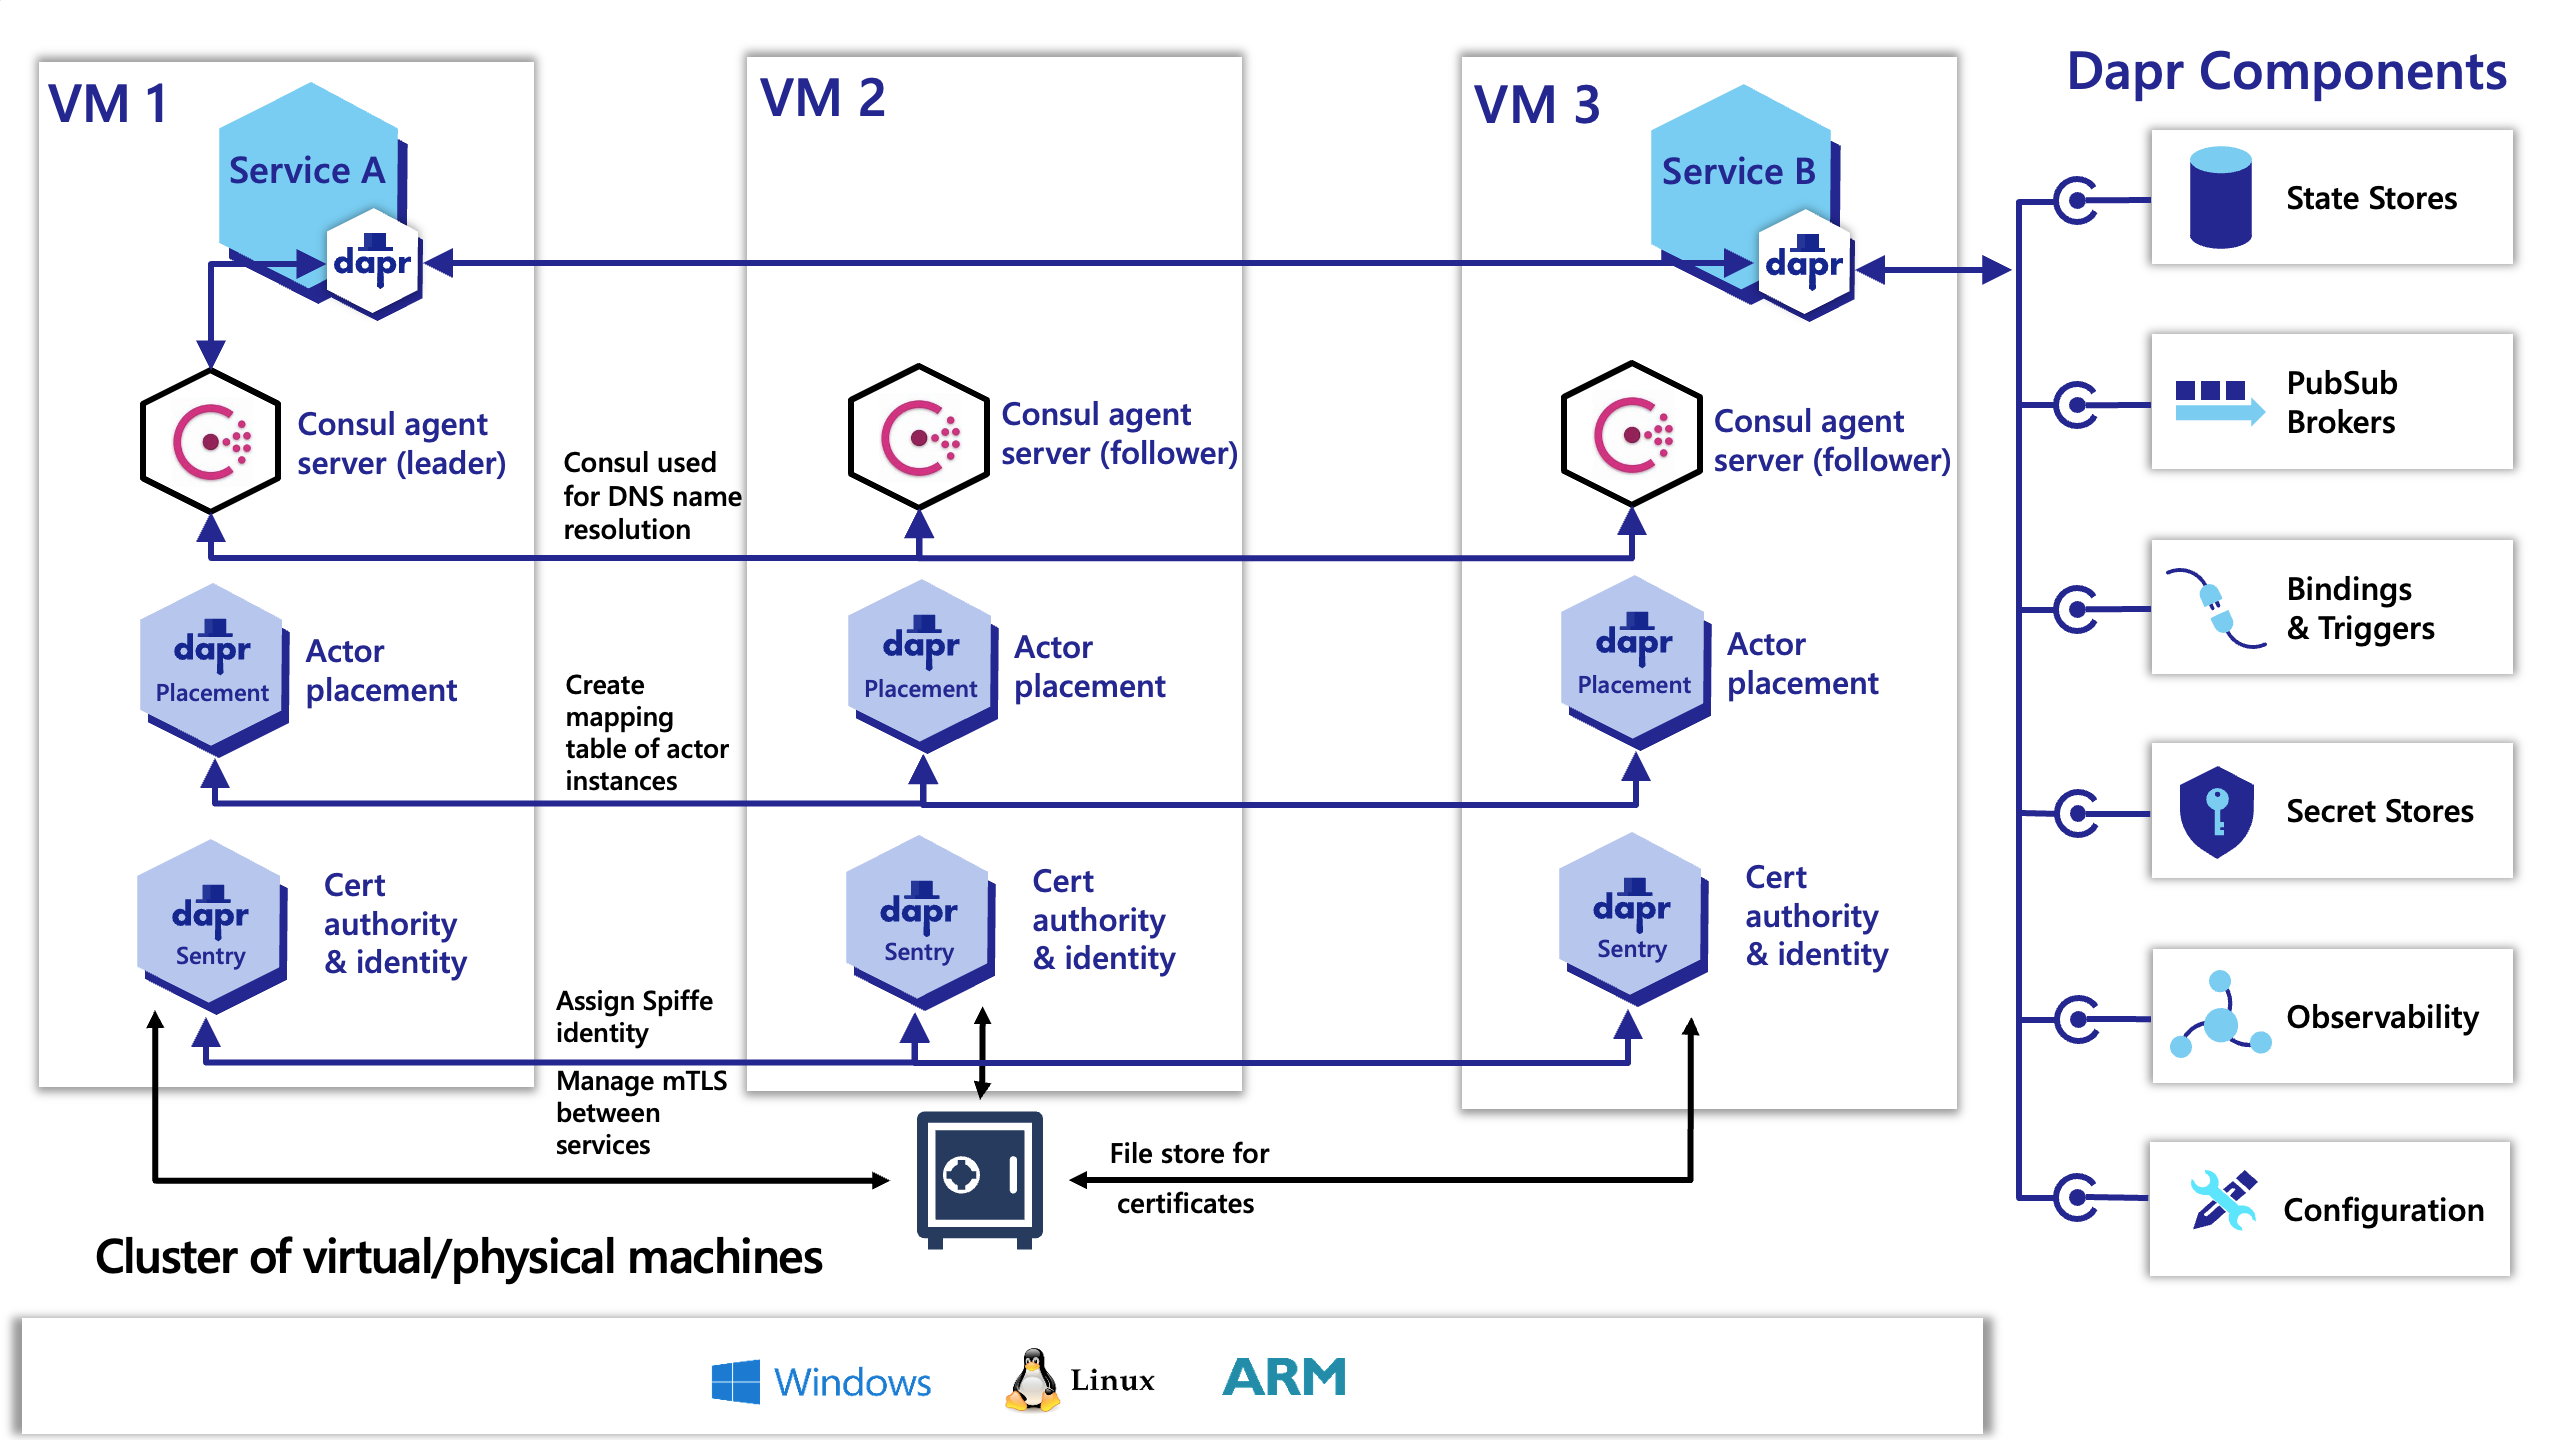 Architecture diagram of Dapr control plane and Consul deployed to VMs in high availability mode